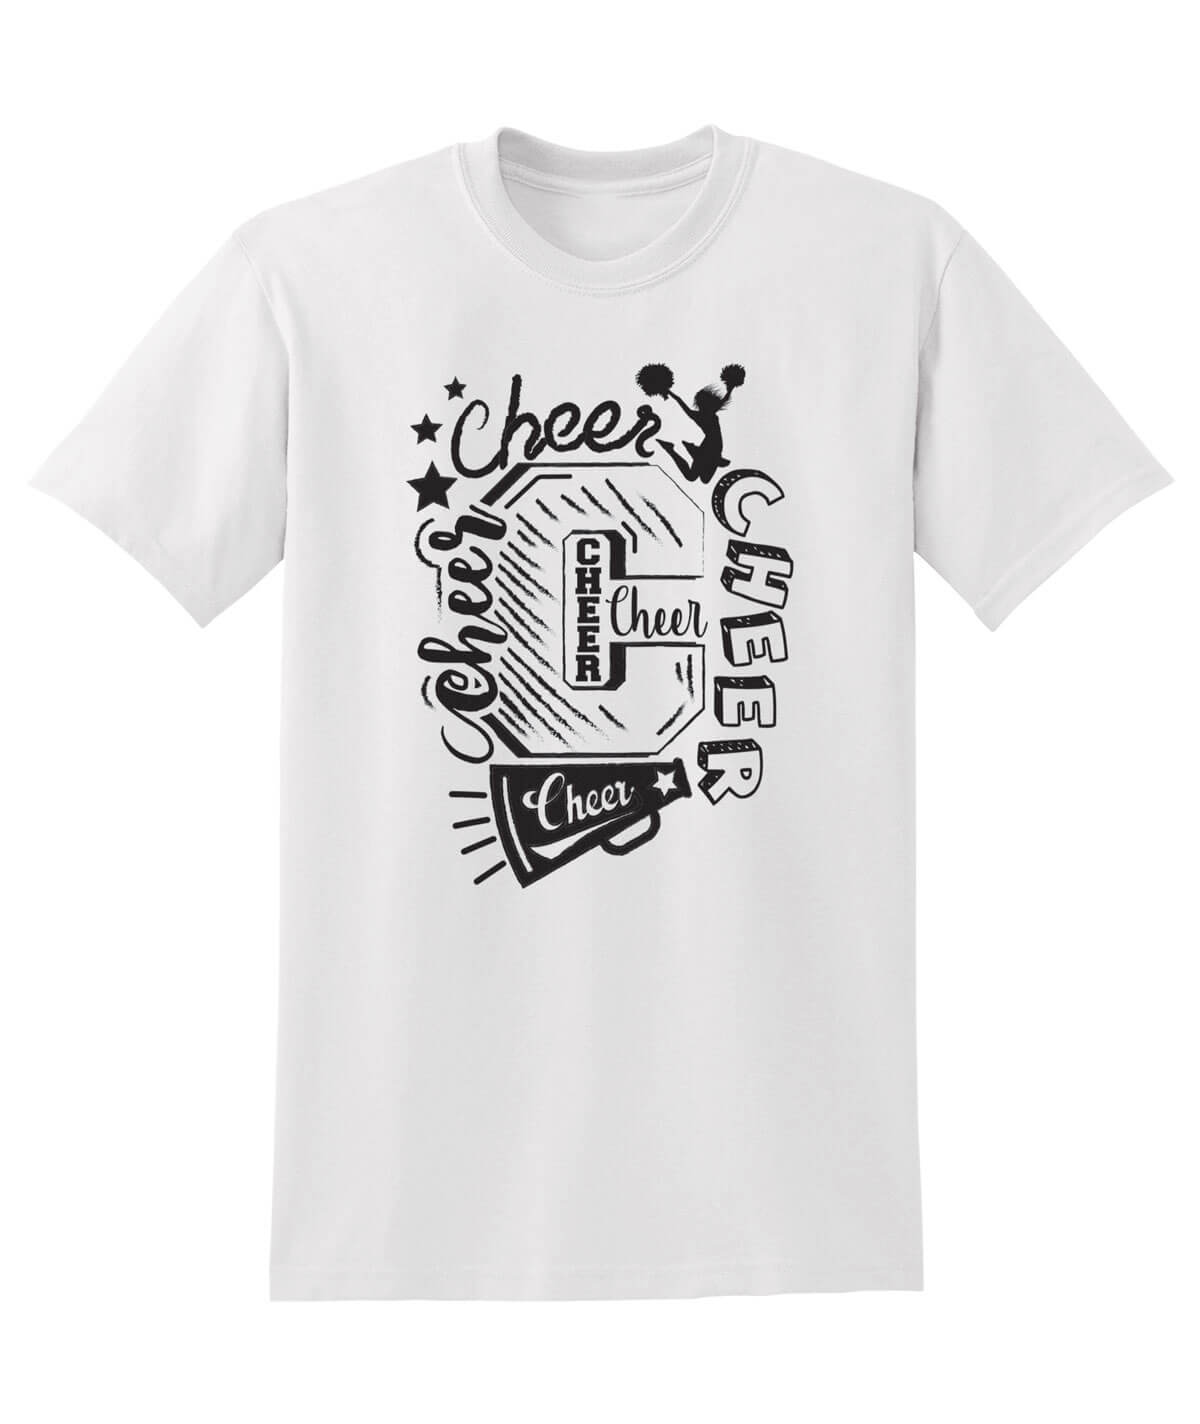 C Is For Cheer Tee